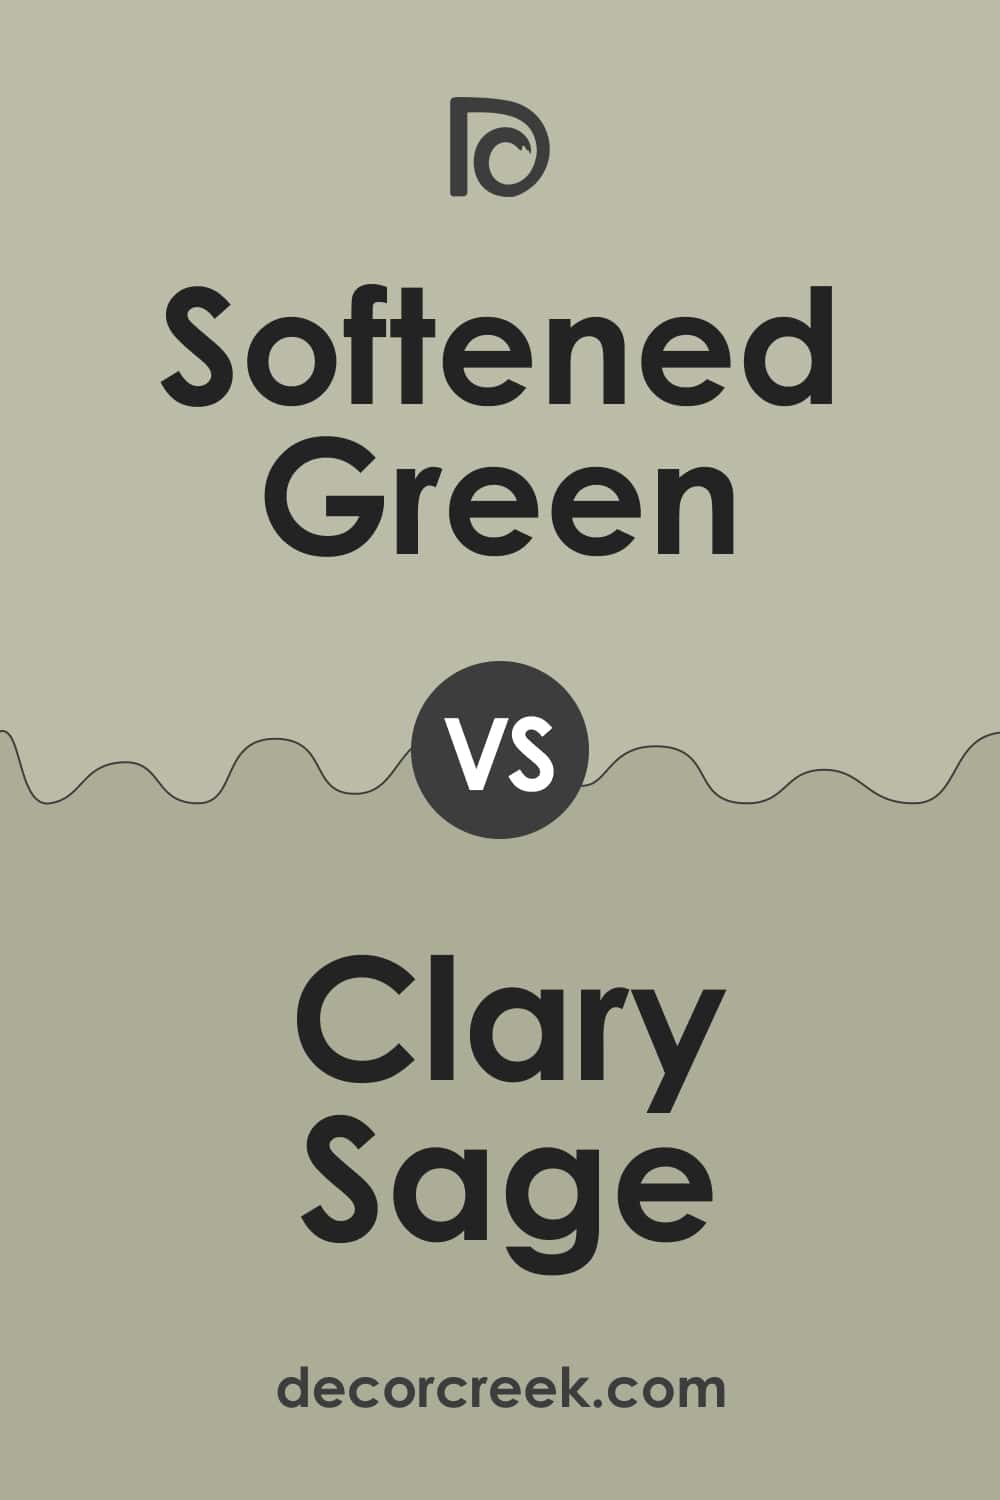 Softened Green vs Clary Sage